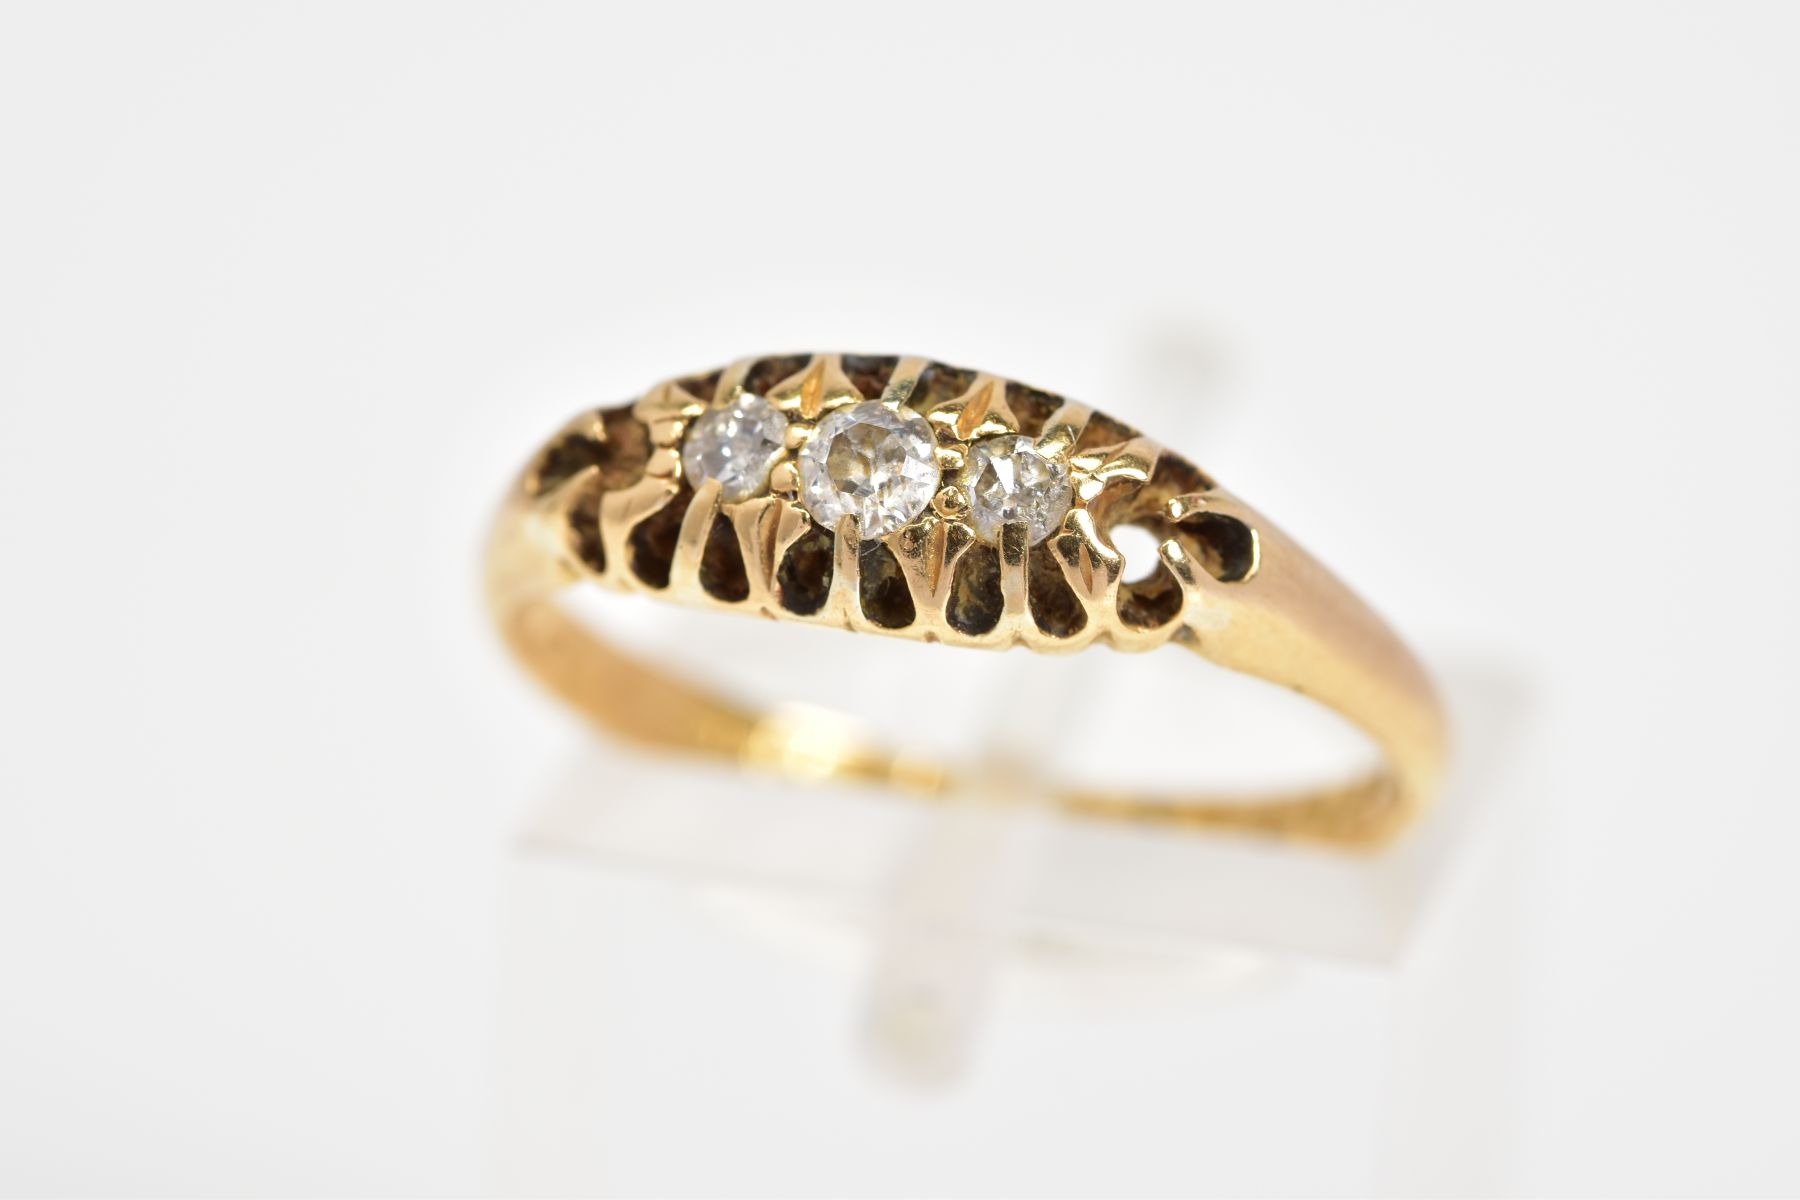 AN EARLY 20TH CENTURY 18CT GIOLD DIAMOND RING, designed as a row of three graduated old cut diamonds